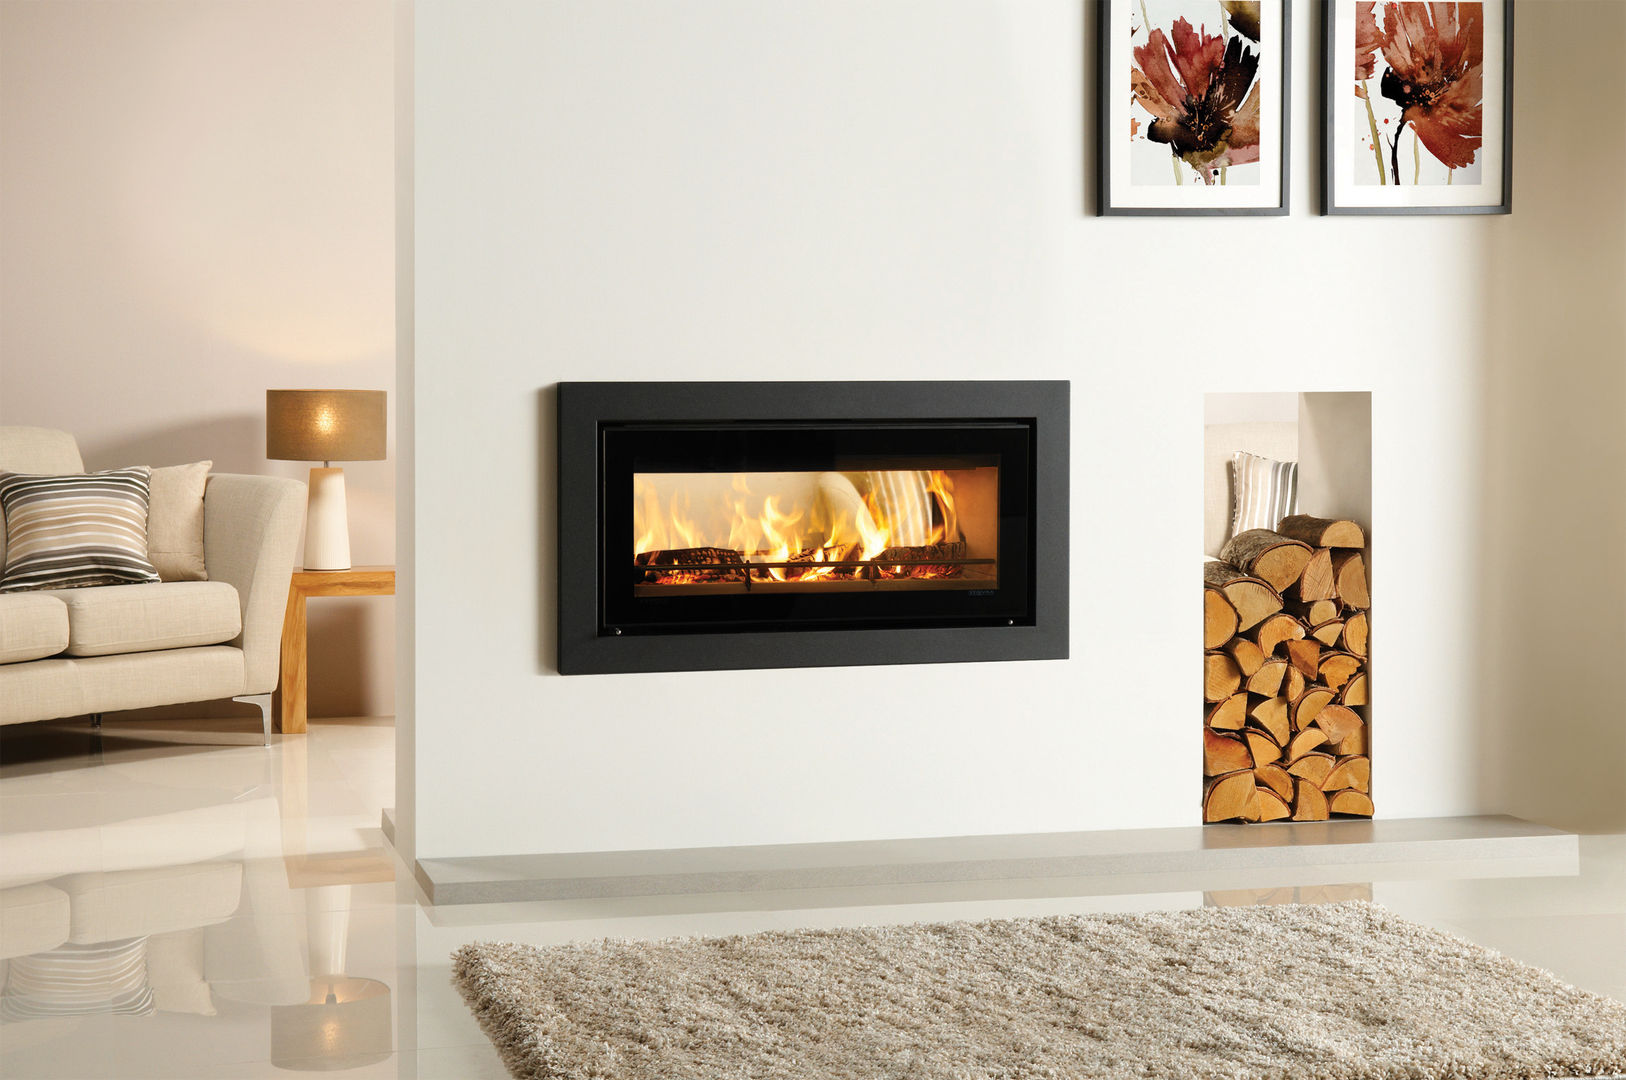 Riva Studio Duplex Fire Stovax Heating Group Modern living room Fireplaces & accessories